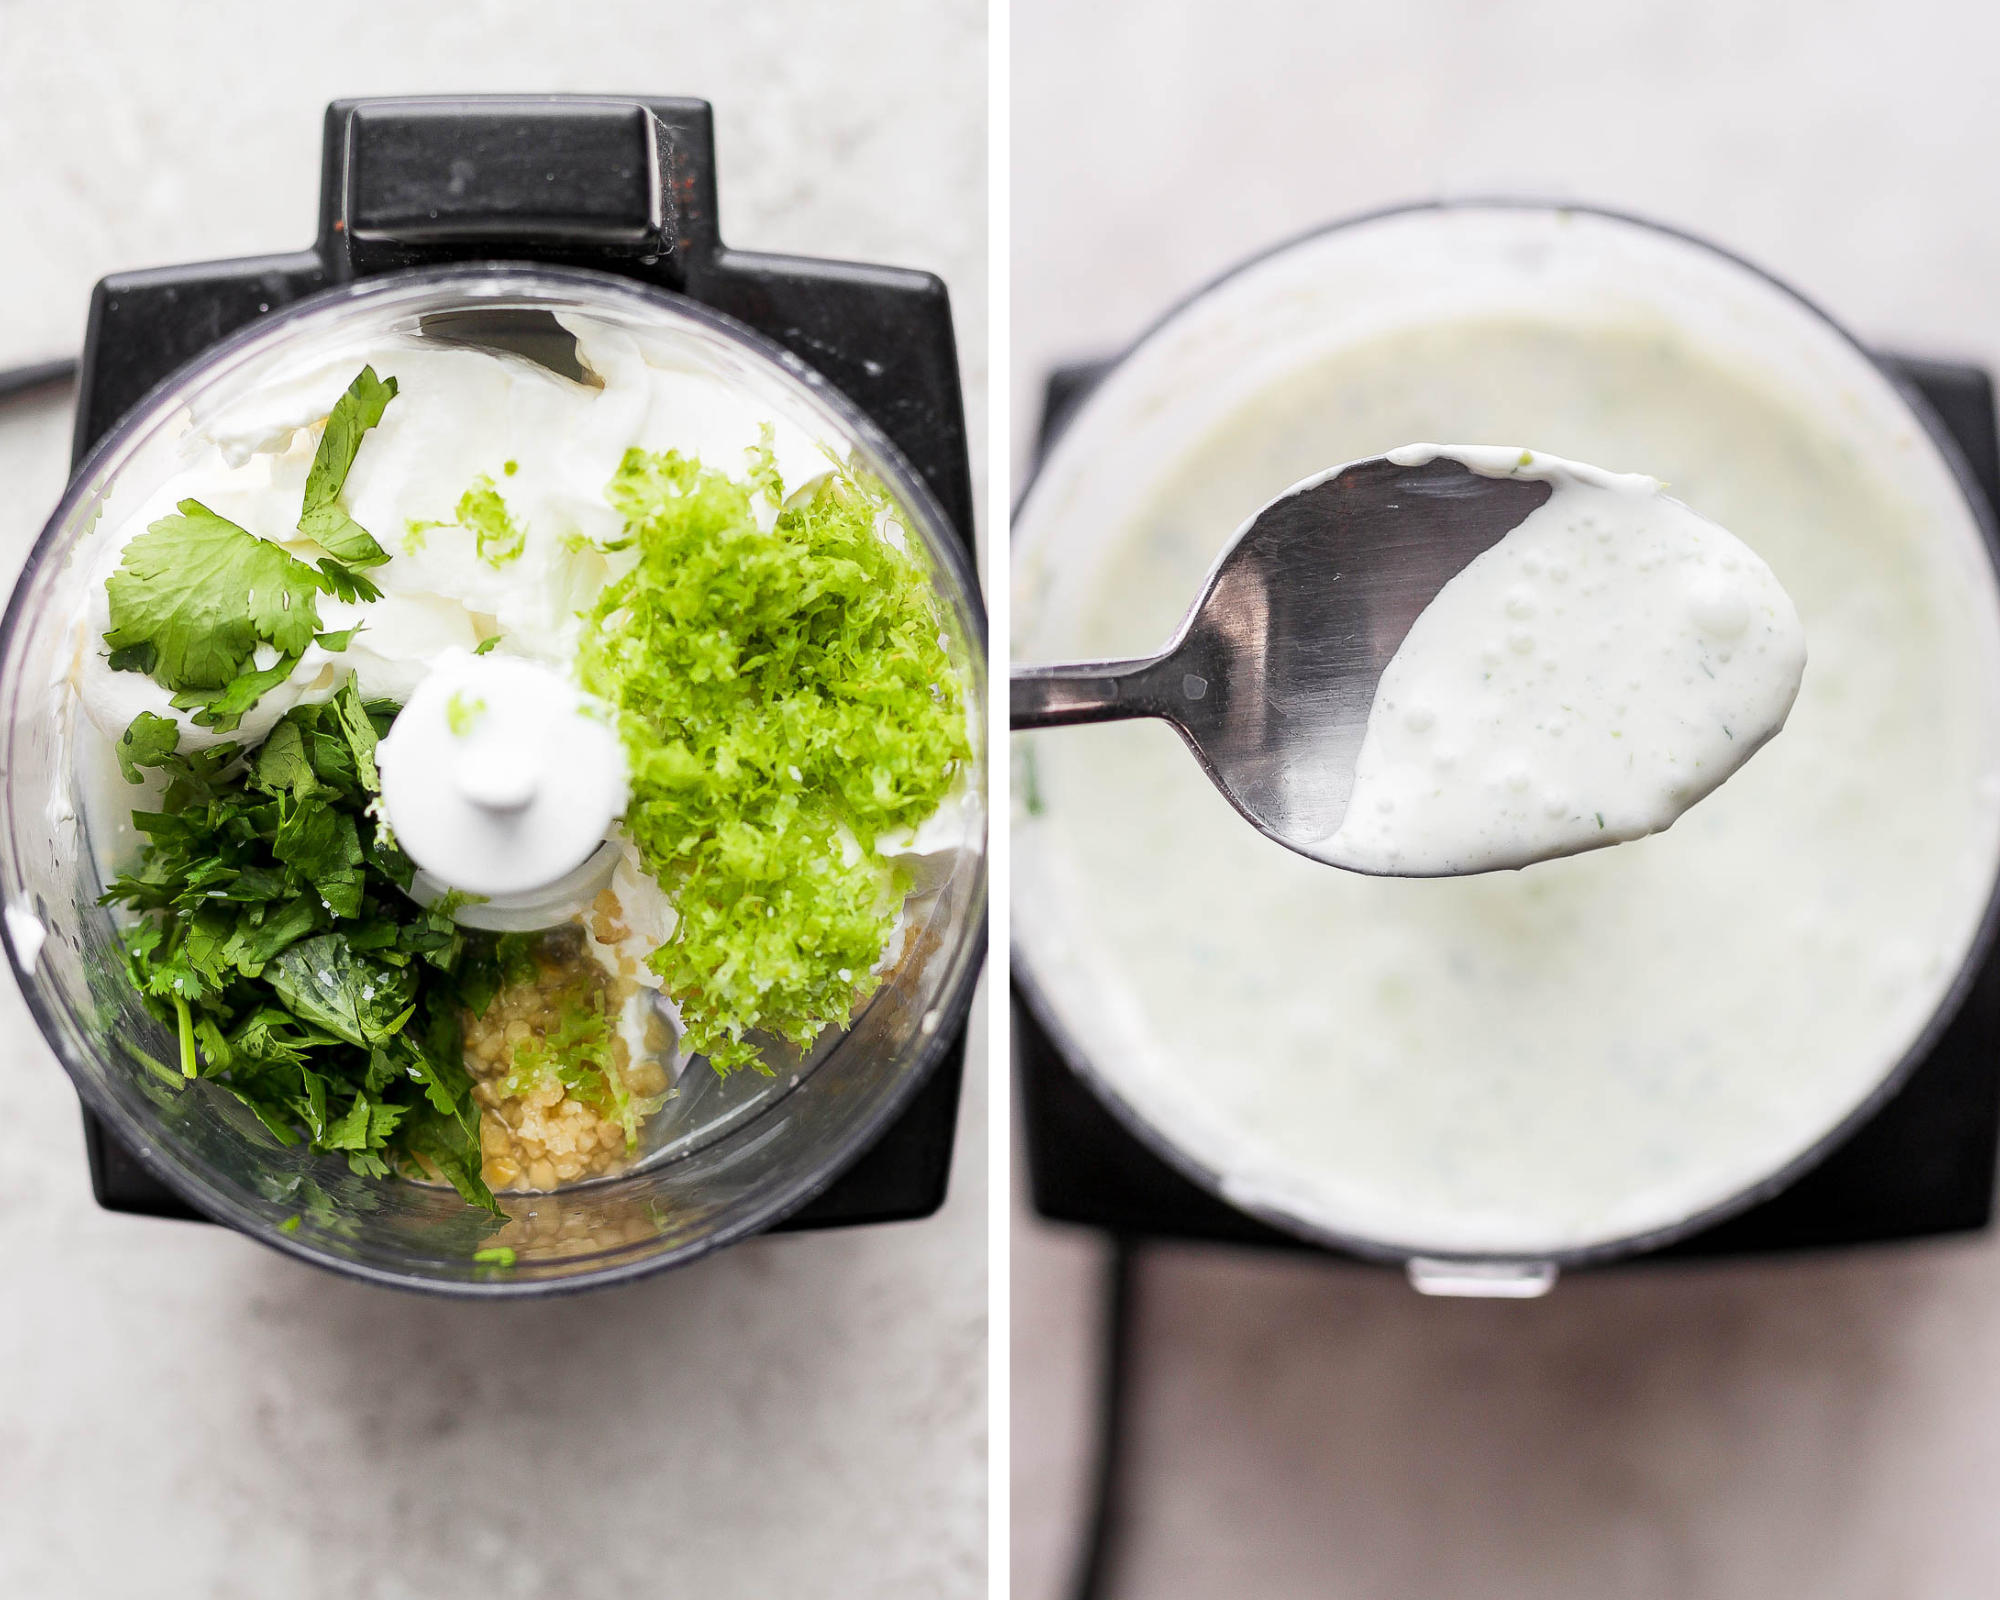 Two images showing the cilantro lime sauce in a food processor before blending and after.